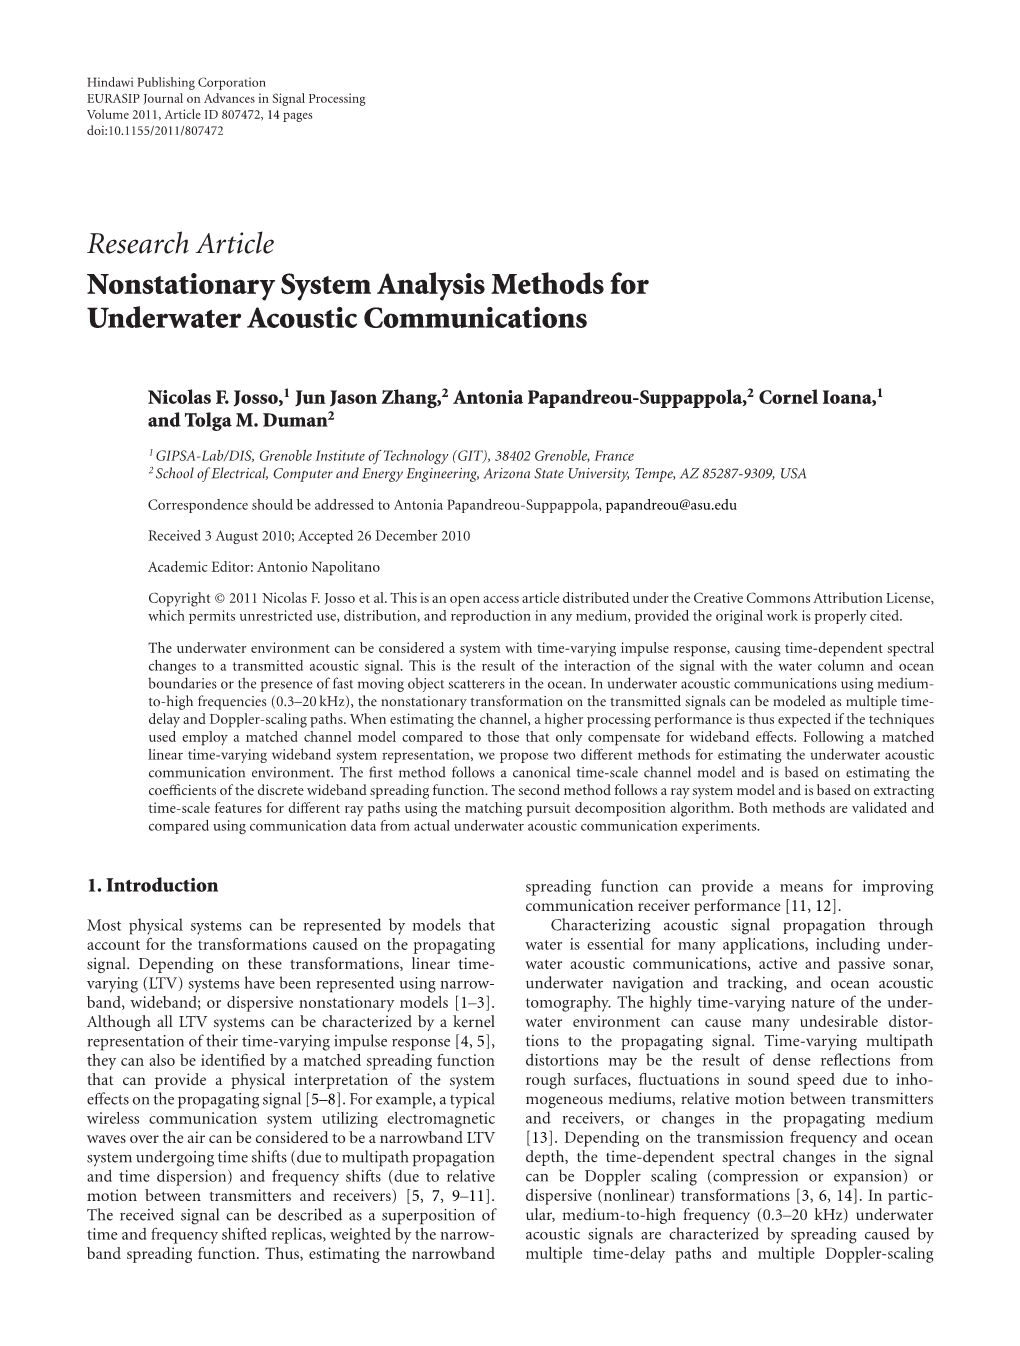 Research Article Nonstationary System Analysis Methods for Underwater Acoustic Communications